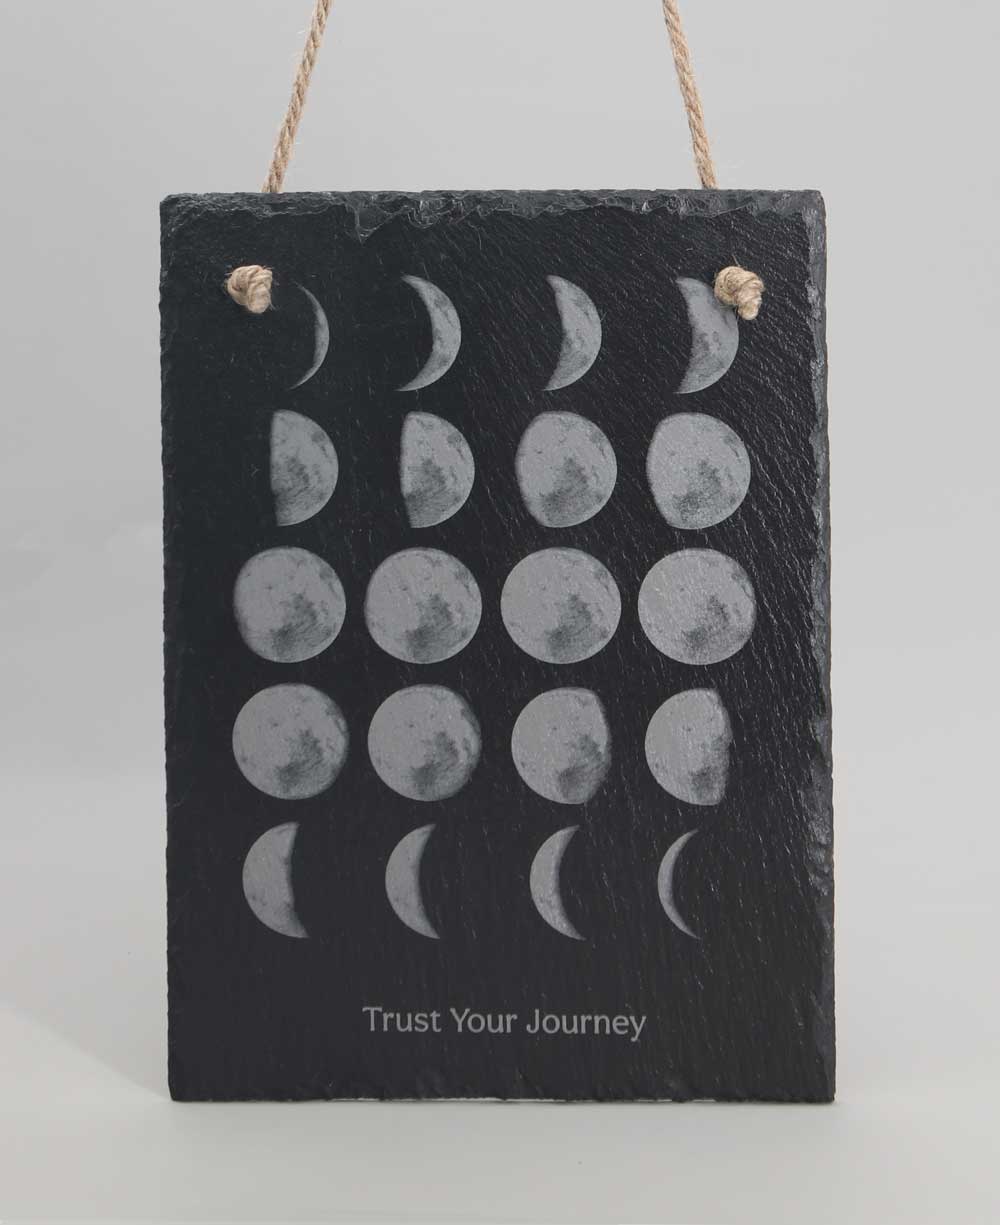 Moon Phase Trust Your Journey Slate Wall Hanging - Posters, Prints, & Visual Artwork